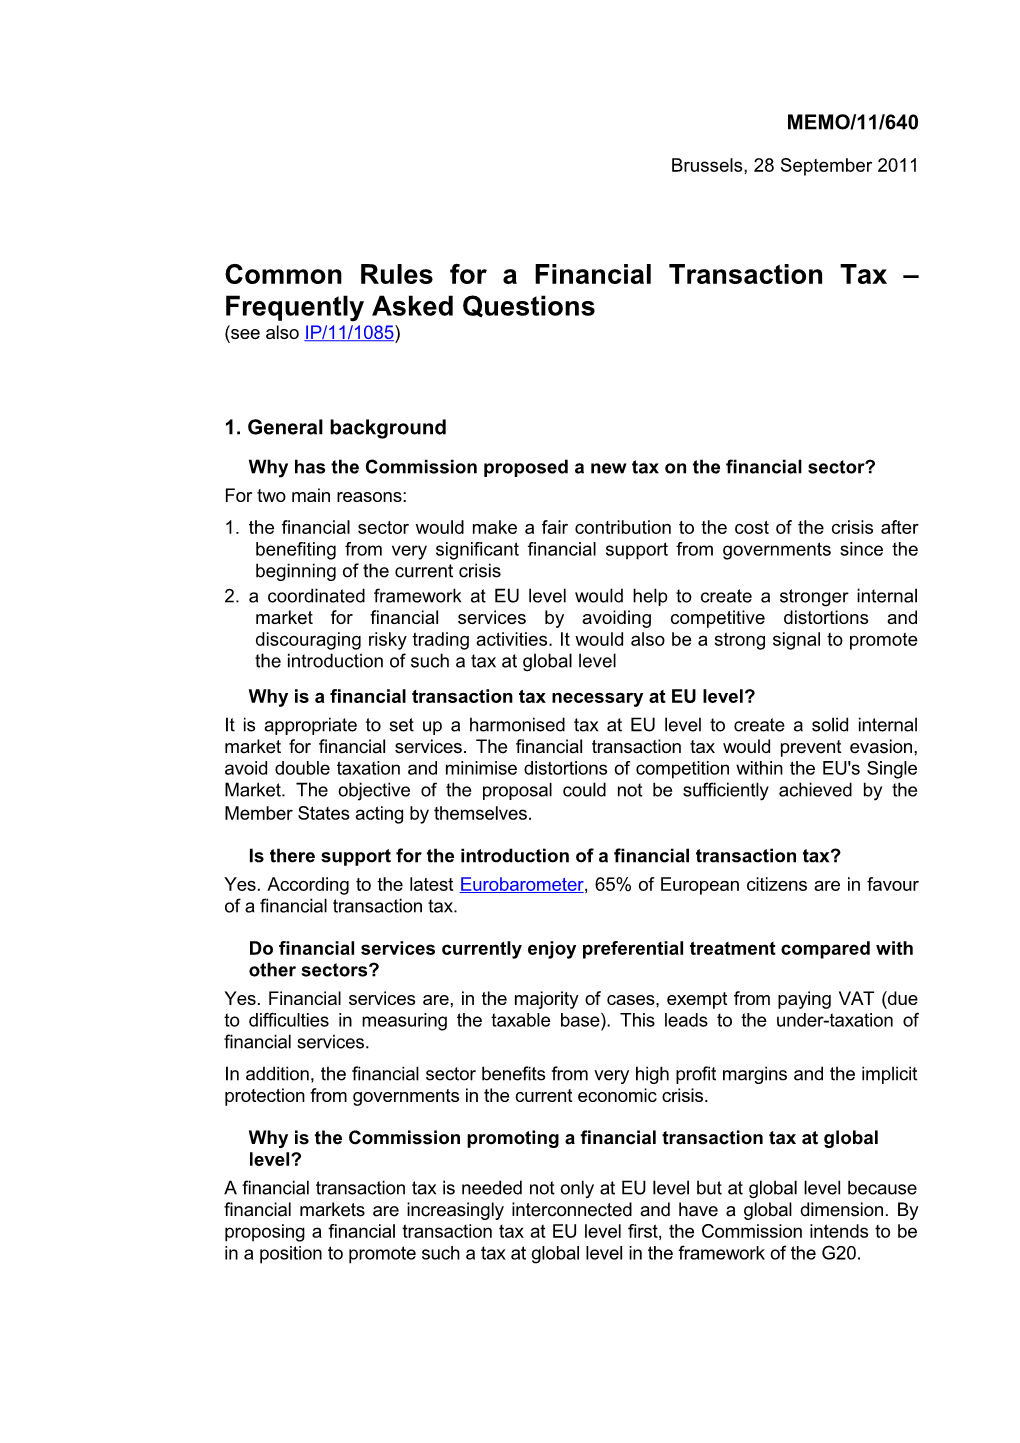 Common Rules for a Financial Transaction Tax Frequently Asked Questions